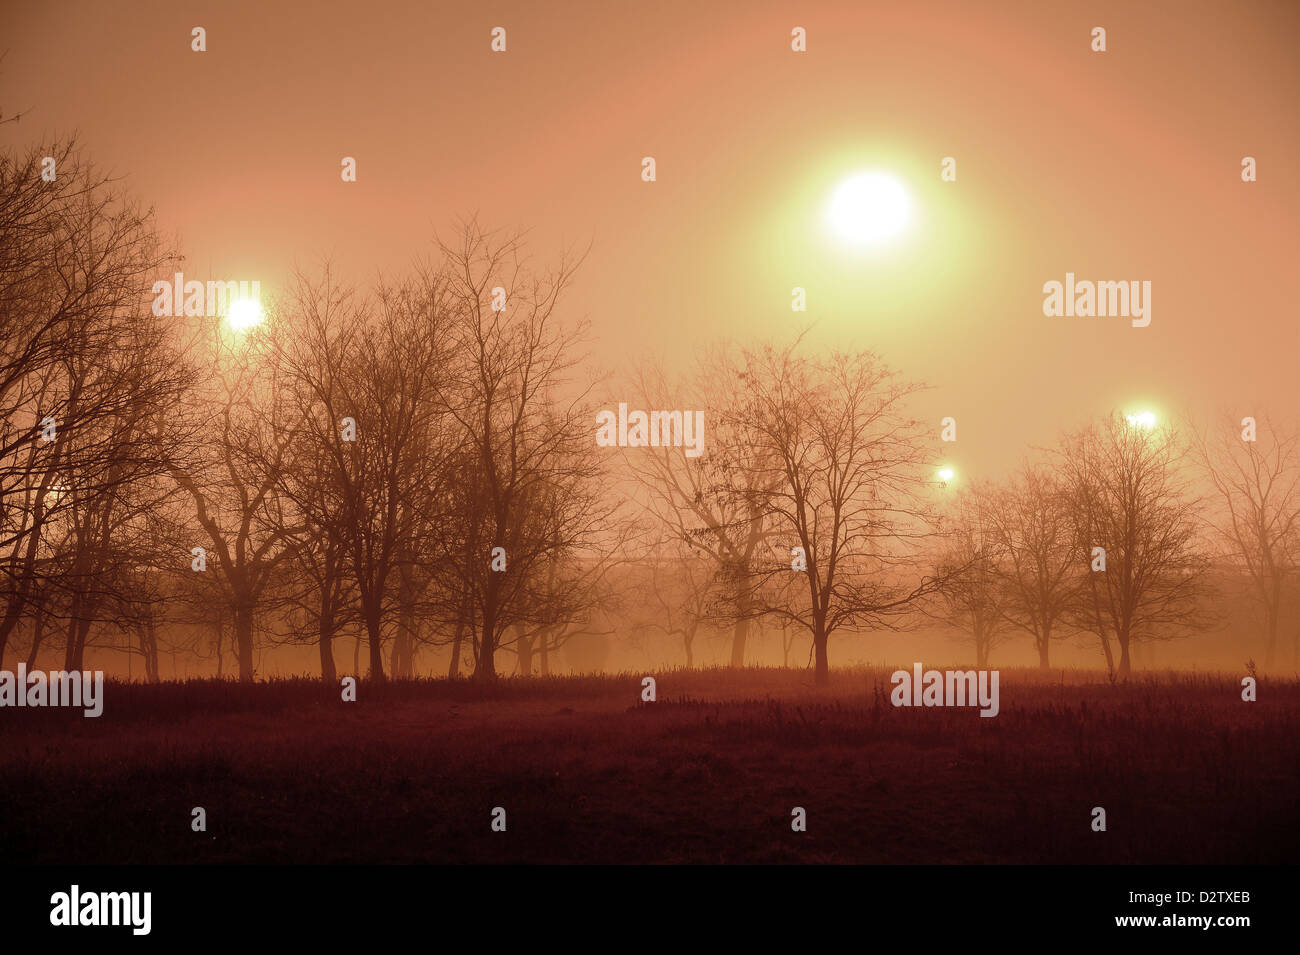 Foggy Hazy Night With Silhouetted Trees Lit By Lights Stock Photo